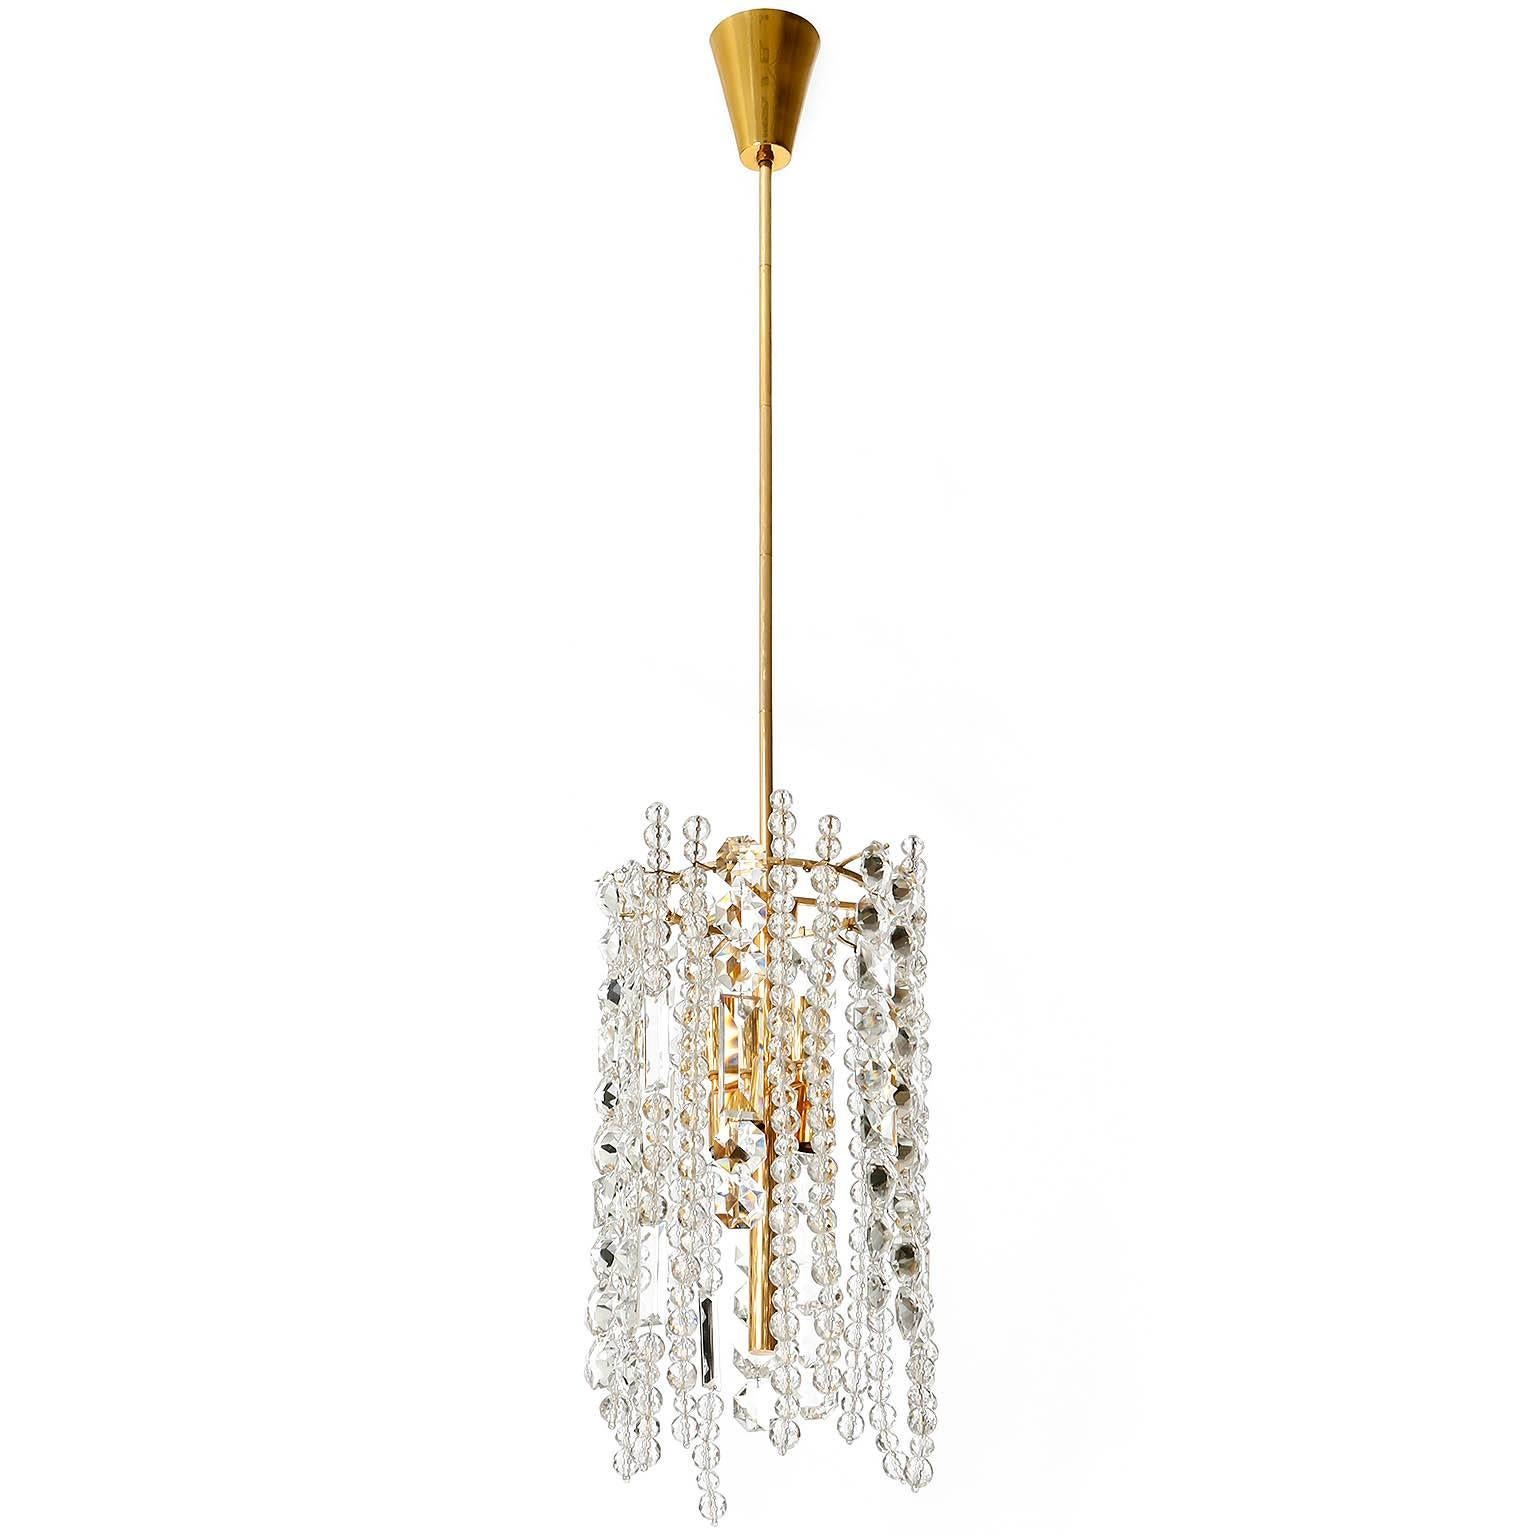 A unique and high quality gold-plated chandelier or pendant light by Bakalowits & Soehne, Austria, manufactured in Mid-Century, circa 1960. 
The light fixutre is made of a gilded brass frame and chains in different lengths decorated with hand cut